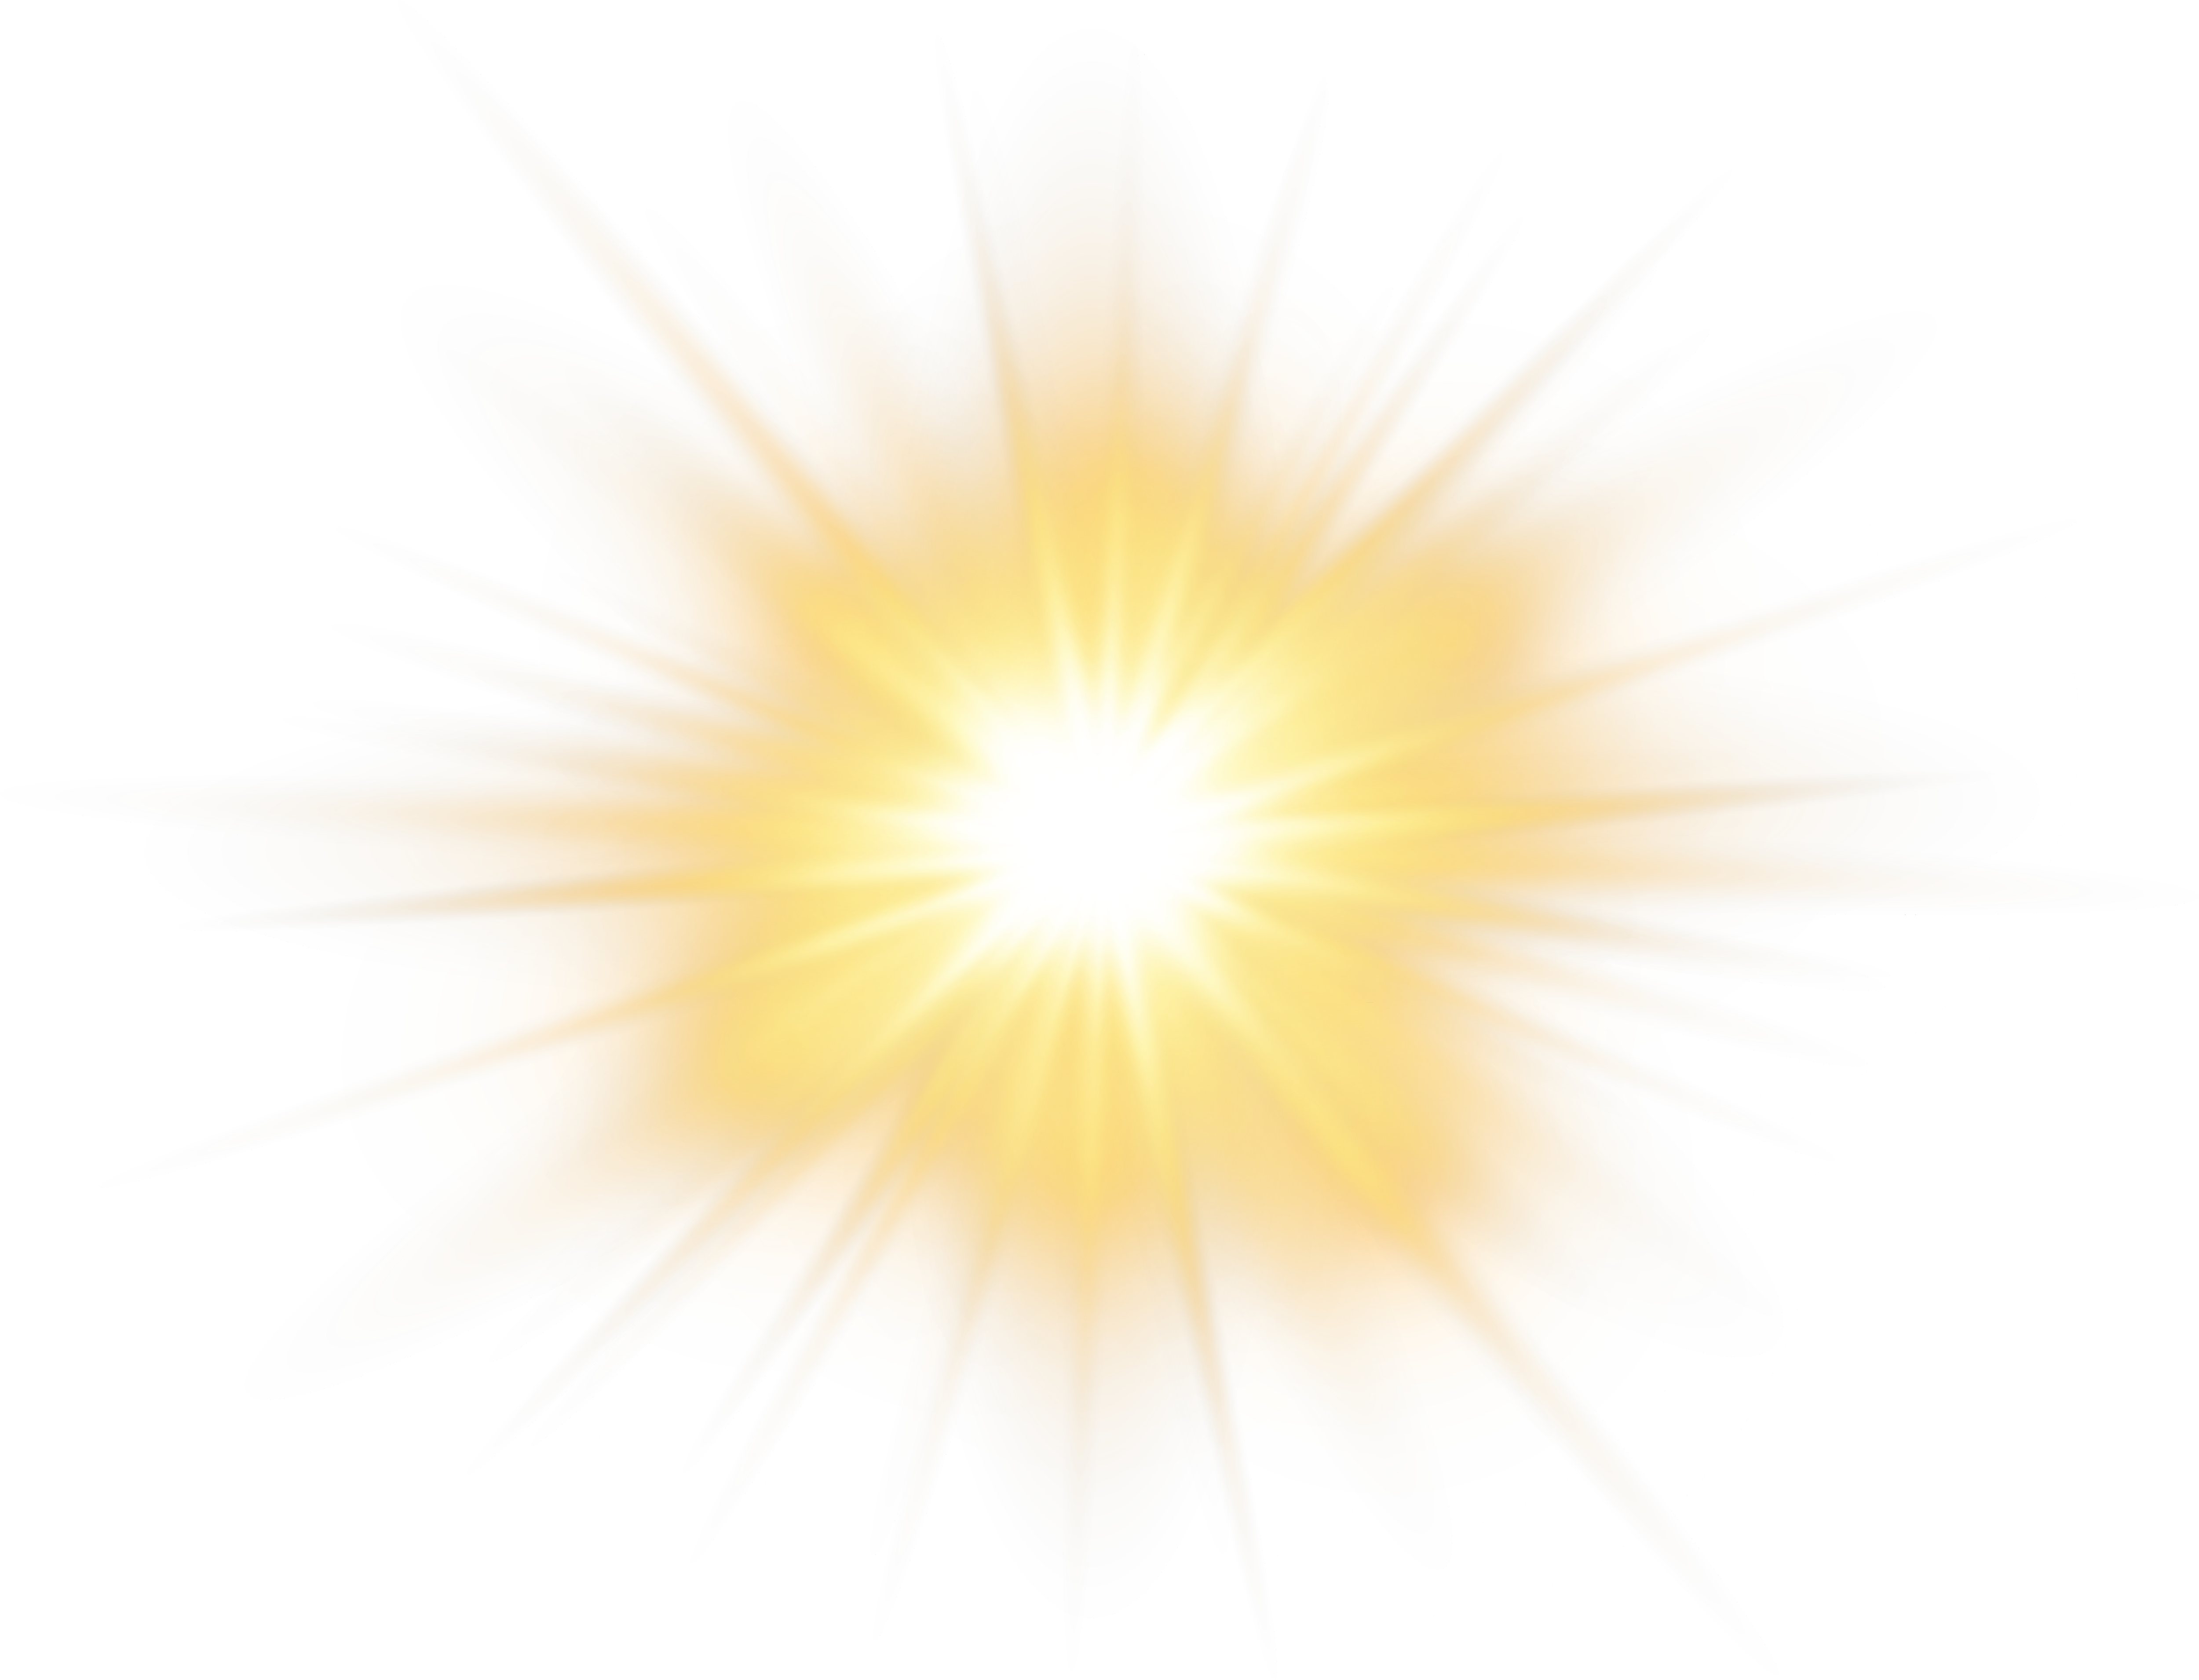 Sunny clipart scenery. Sun effect transparent png